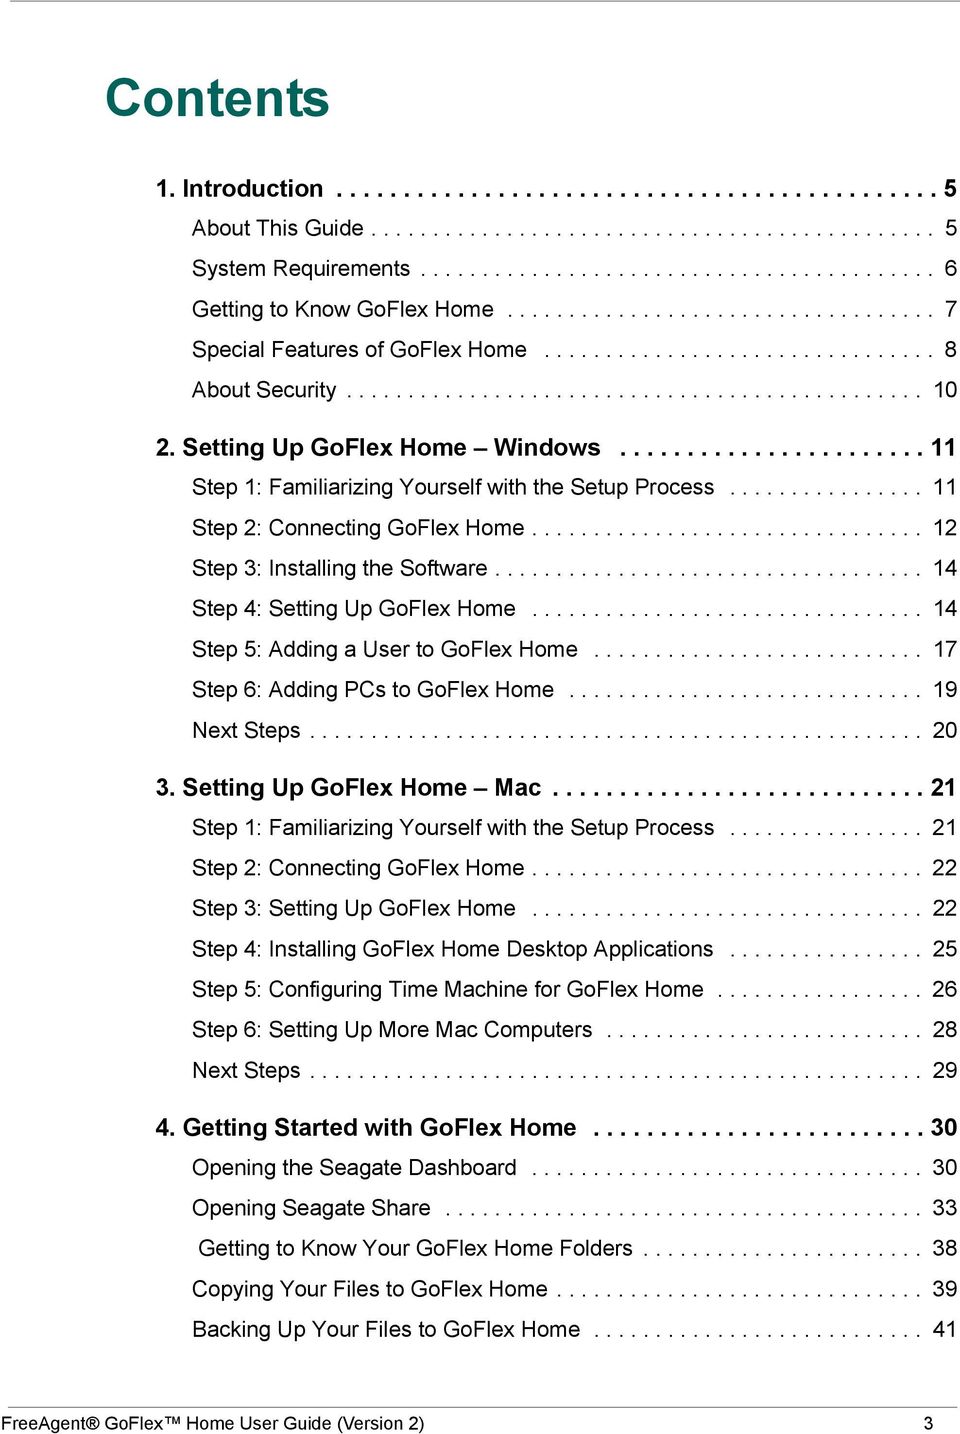 Setting Up GoFlex Home Windows....................... 11 Step 1: Familiarizing Yourself with the Setup Process................ 11 Step 2: Connecting GoFlex Home................................ 12 Step 3: Installing the Software.